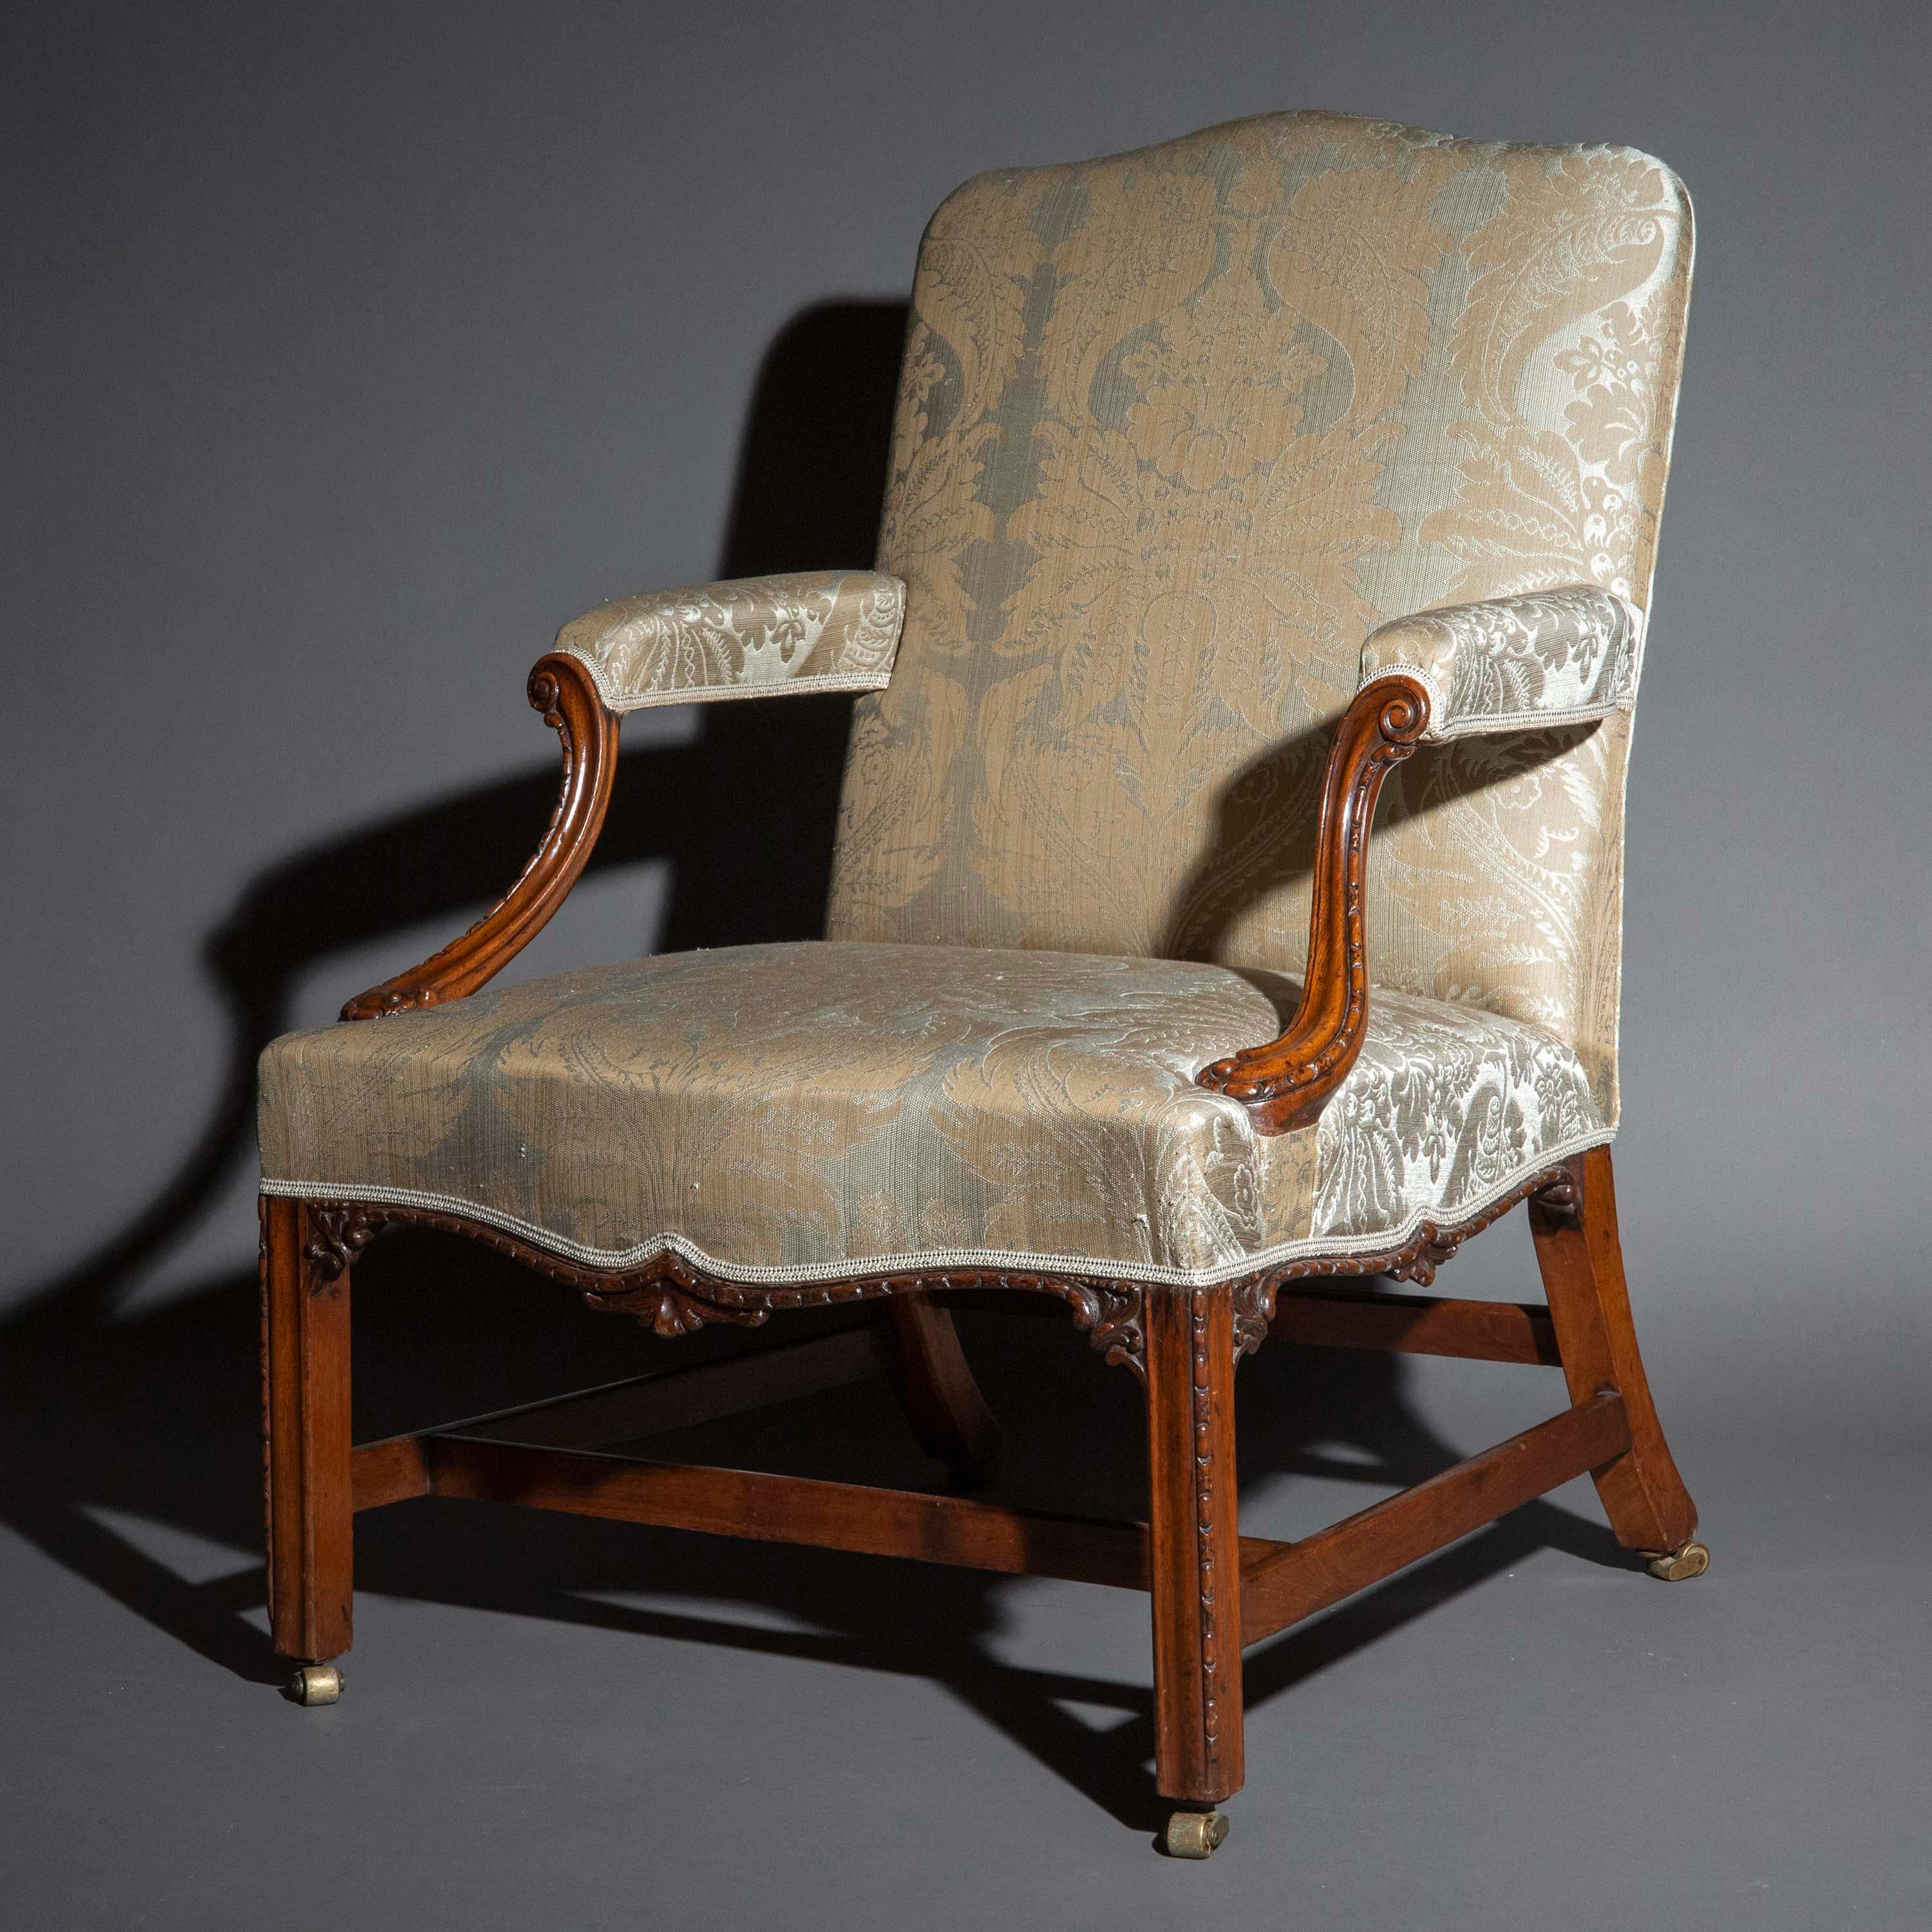 Large English Chippendale Gainsborough Armchair, mid-18th Century For Sale 11